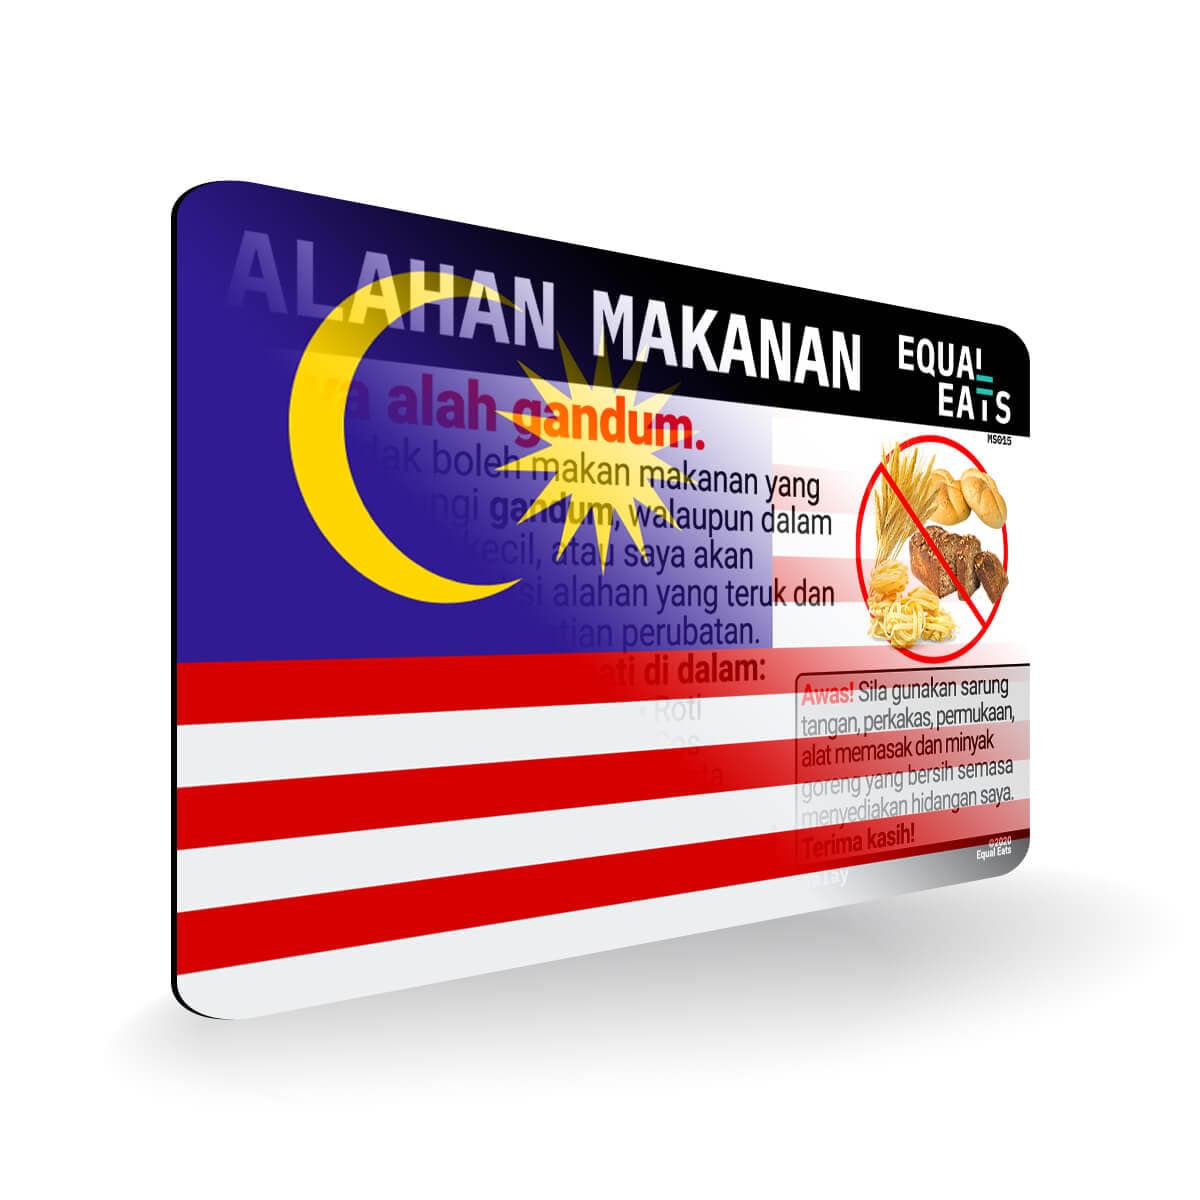 Wheat Allergy in Malay. Wheat Allergy Card for Malaysia